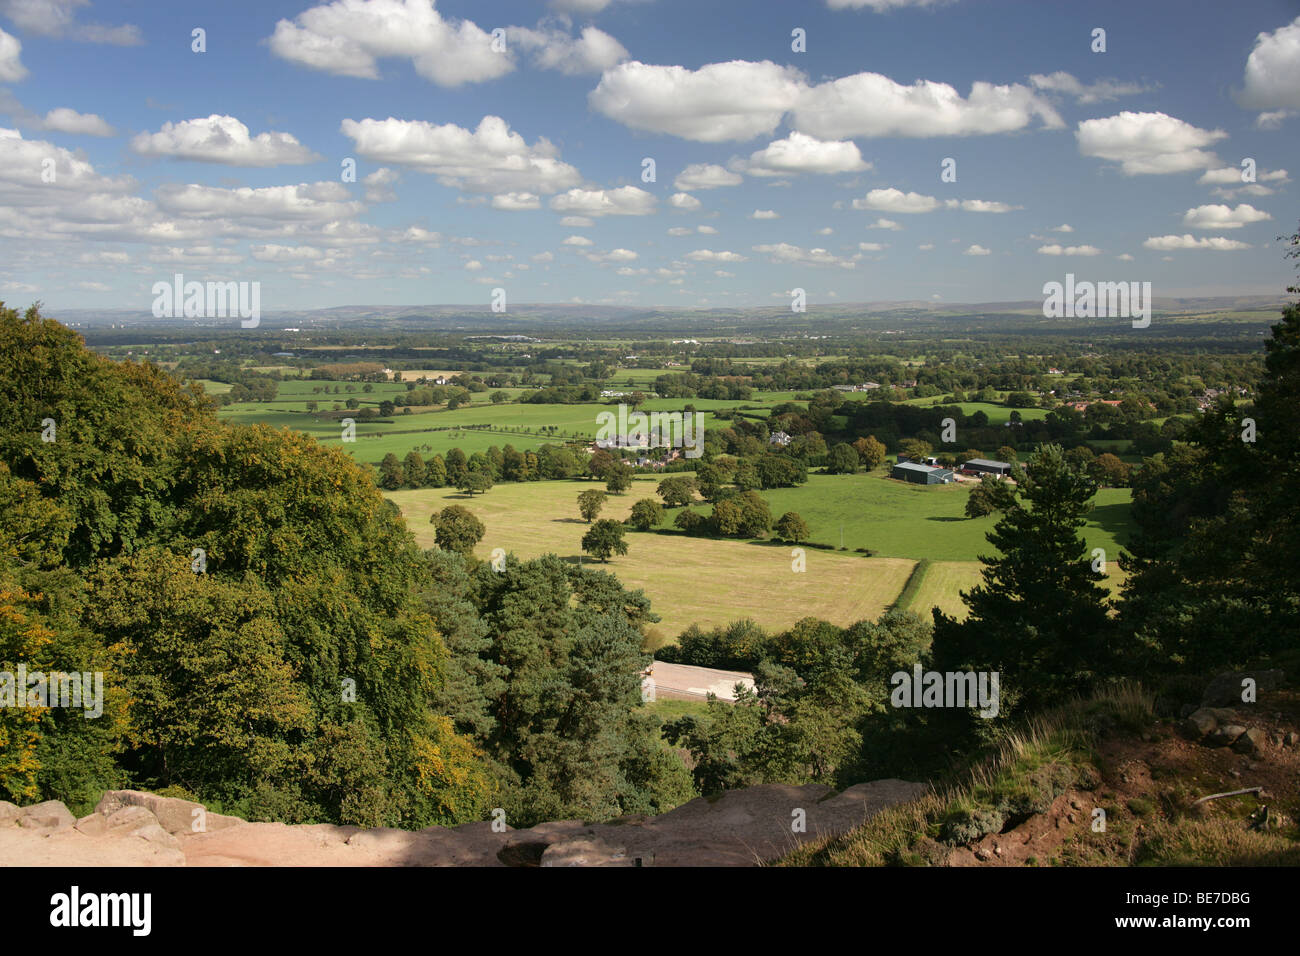 Area of Alderley, England. View from Stormy Point looking across the Cheshire plain towards the Peak District National Park. Stock Photo